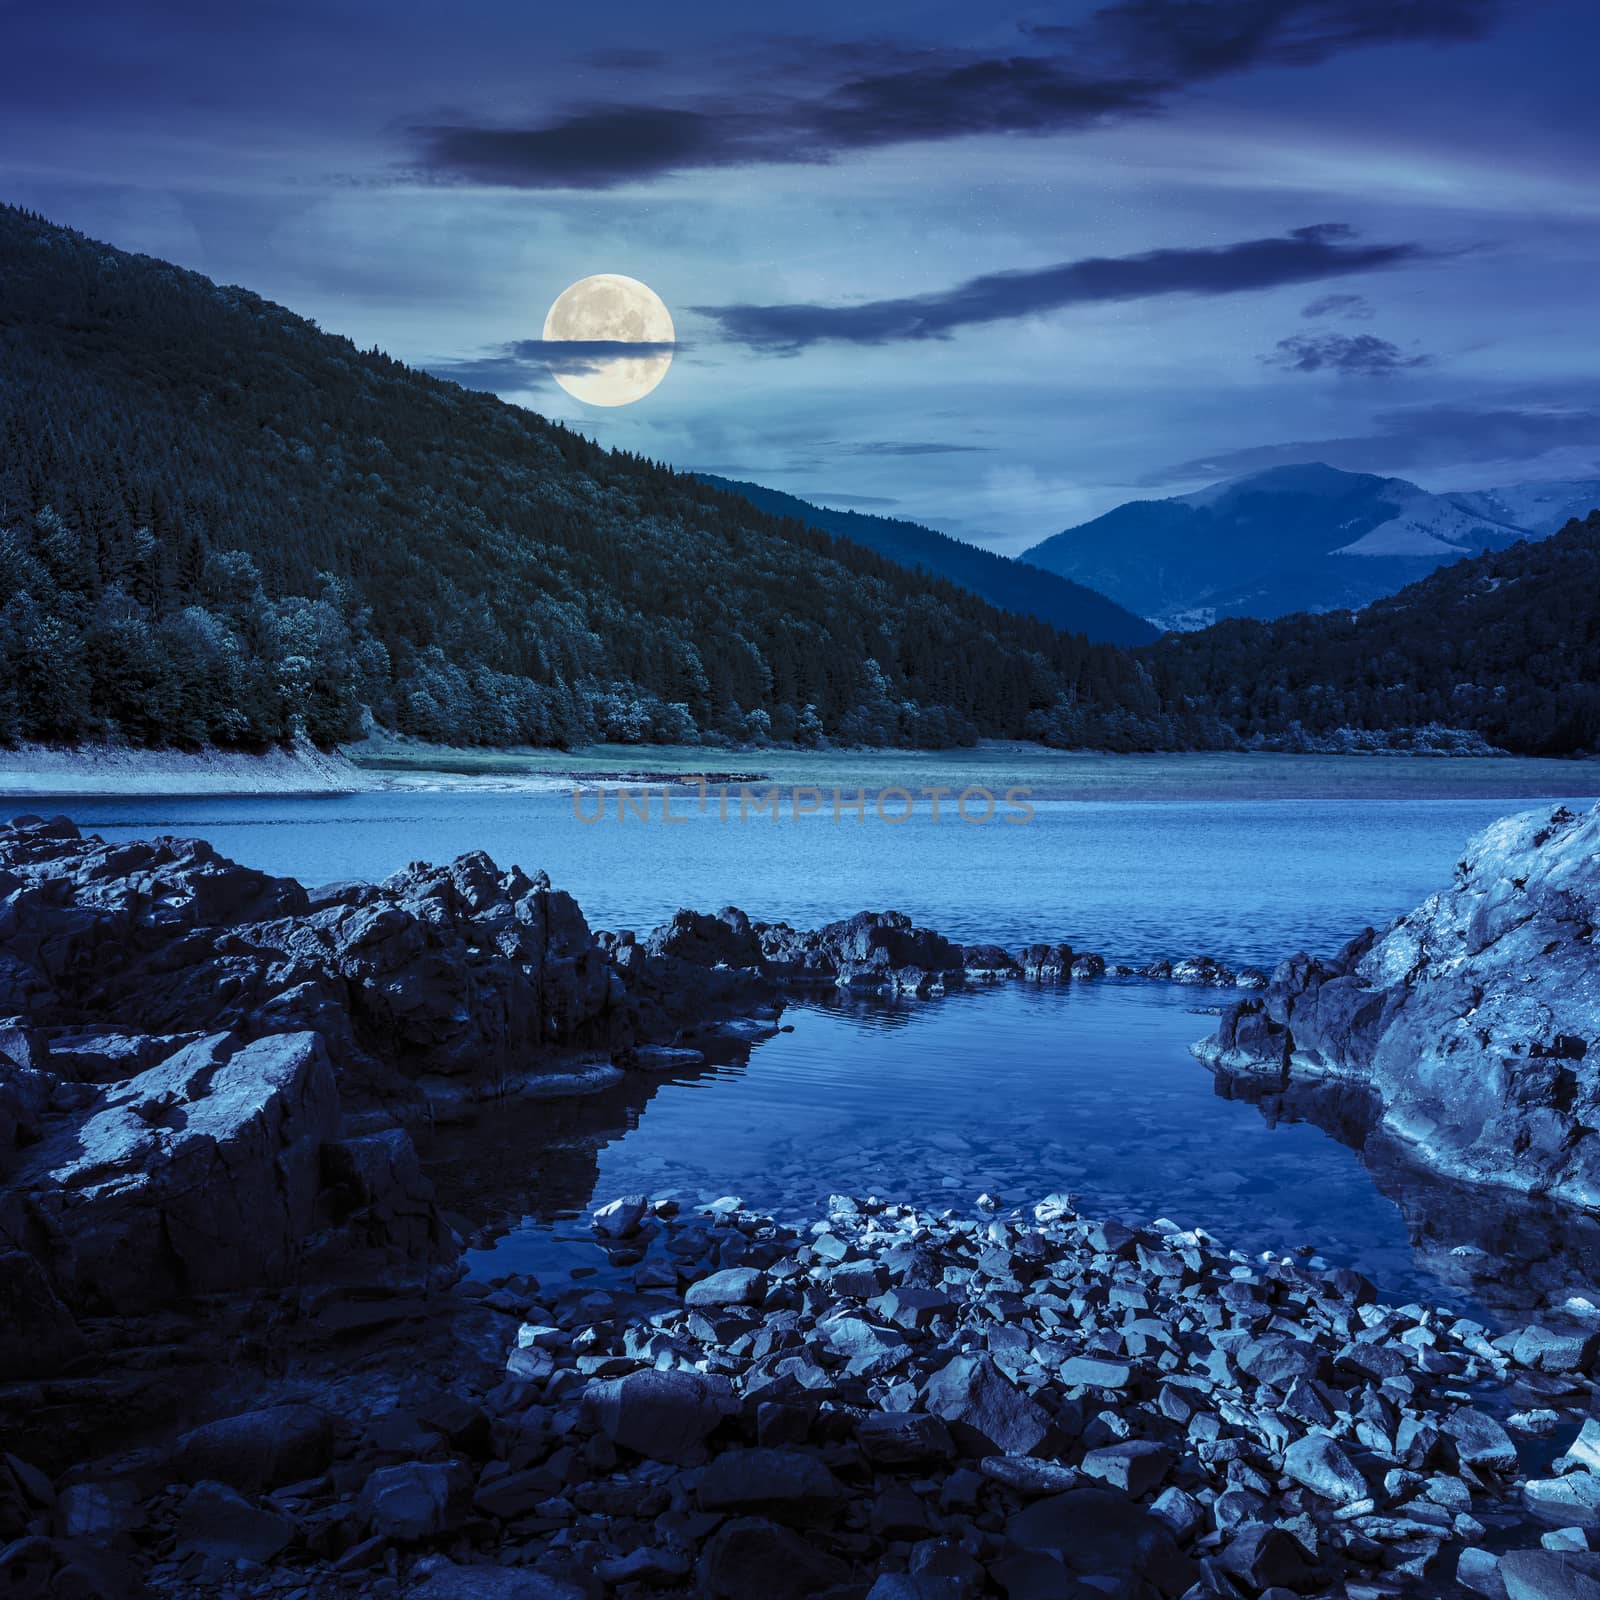 view on lake with rocky shore and some boulders near pine forest on mountain  with high vista far away at night in full moon light